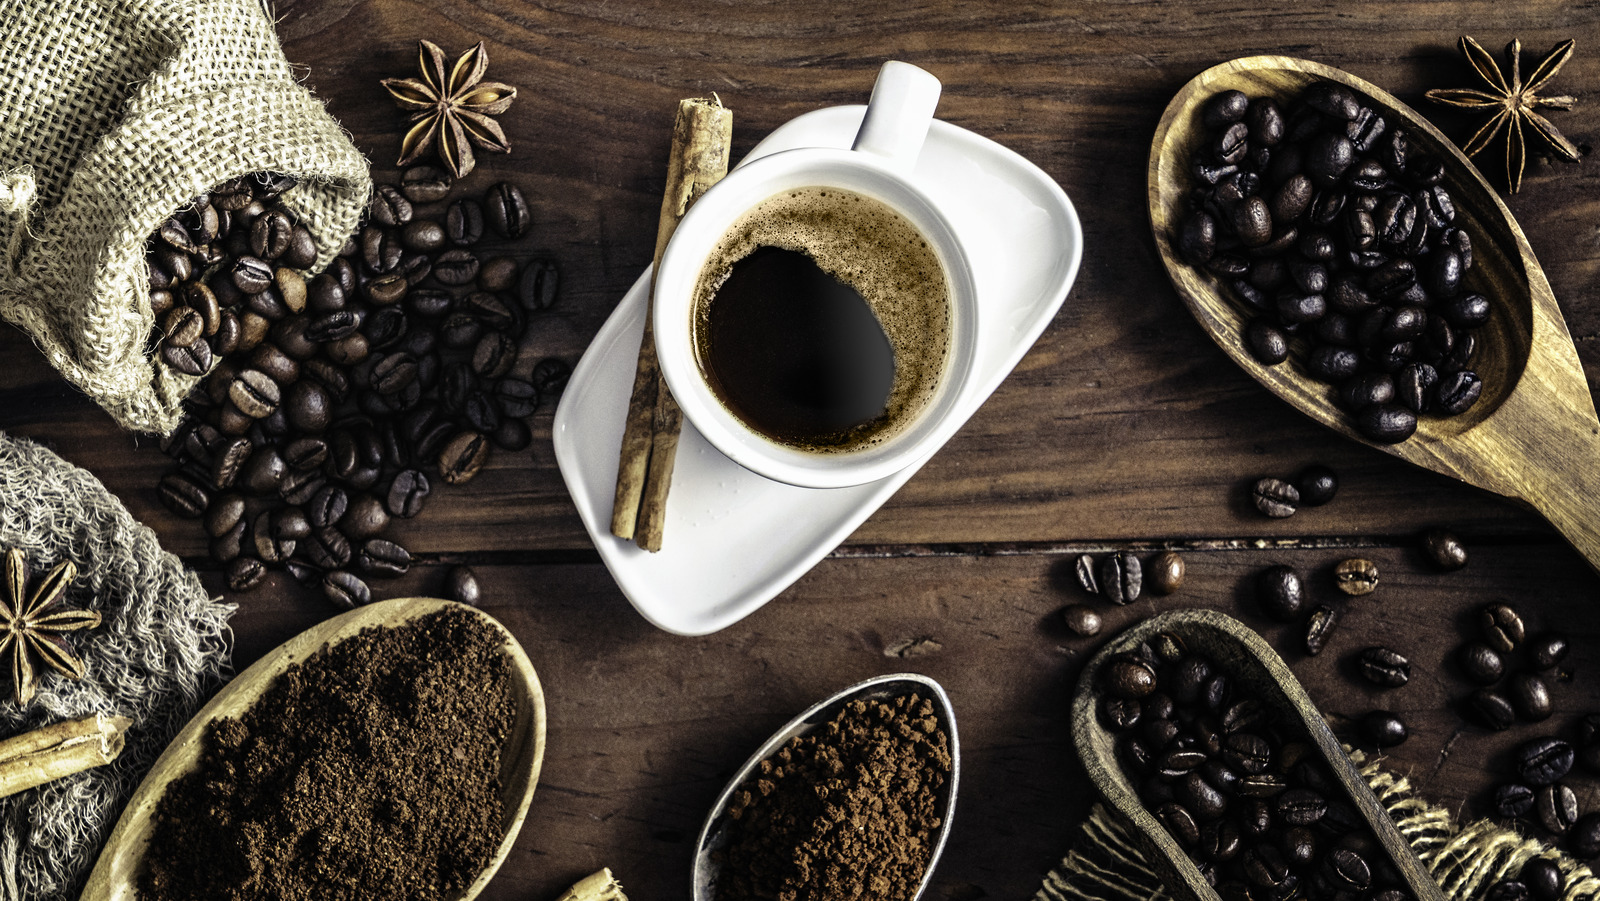 How much caffeine is in decaffeinated coffee?